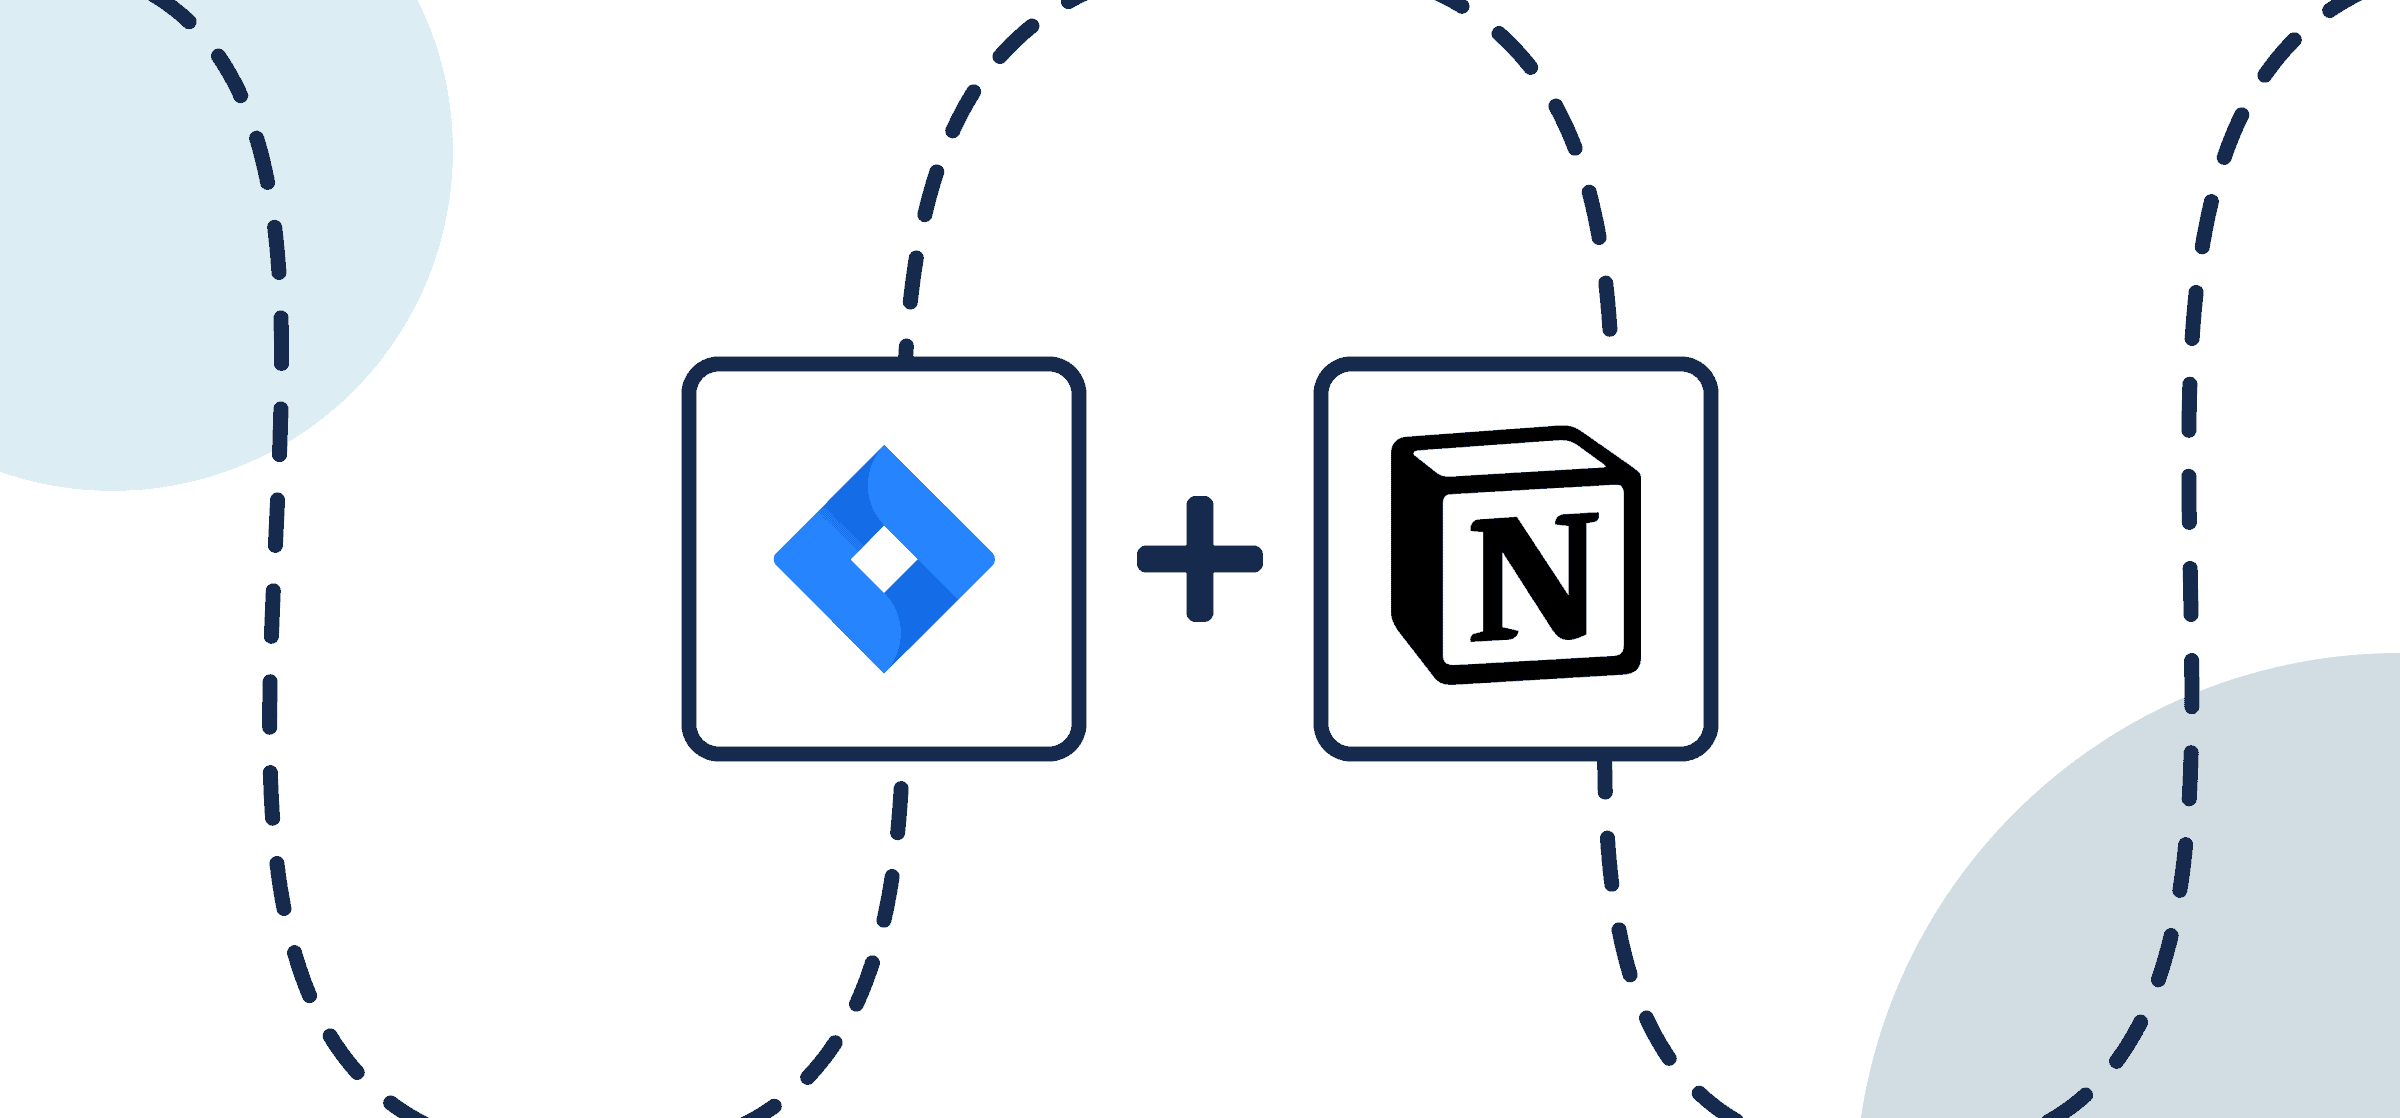 Featured image displaying the logos of jira and Notion in Unito's guide to setting up a simple Two-Way Sync